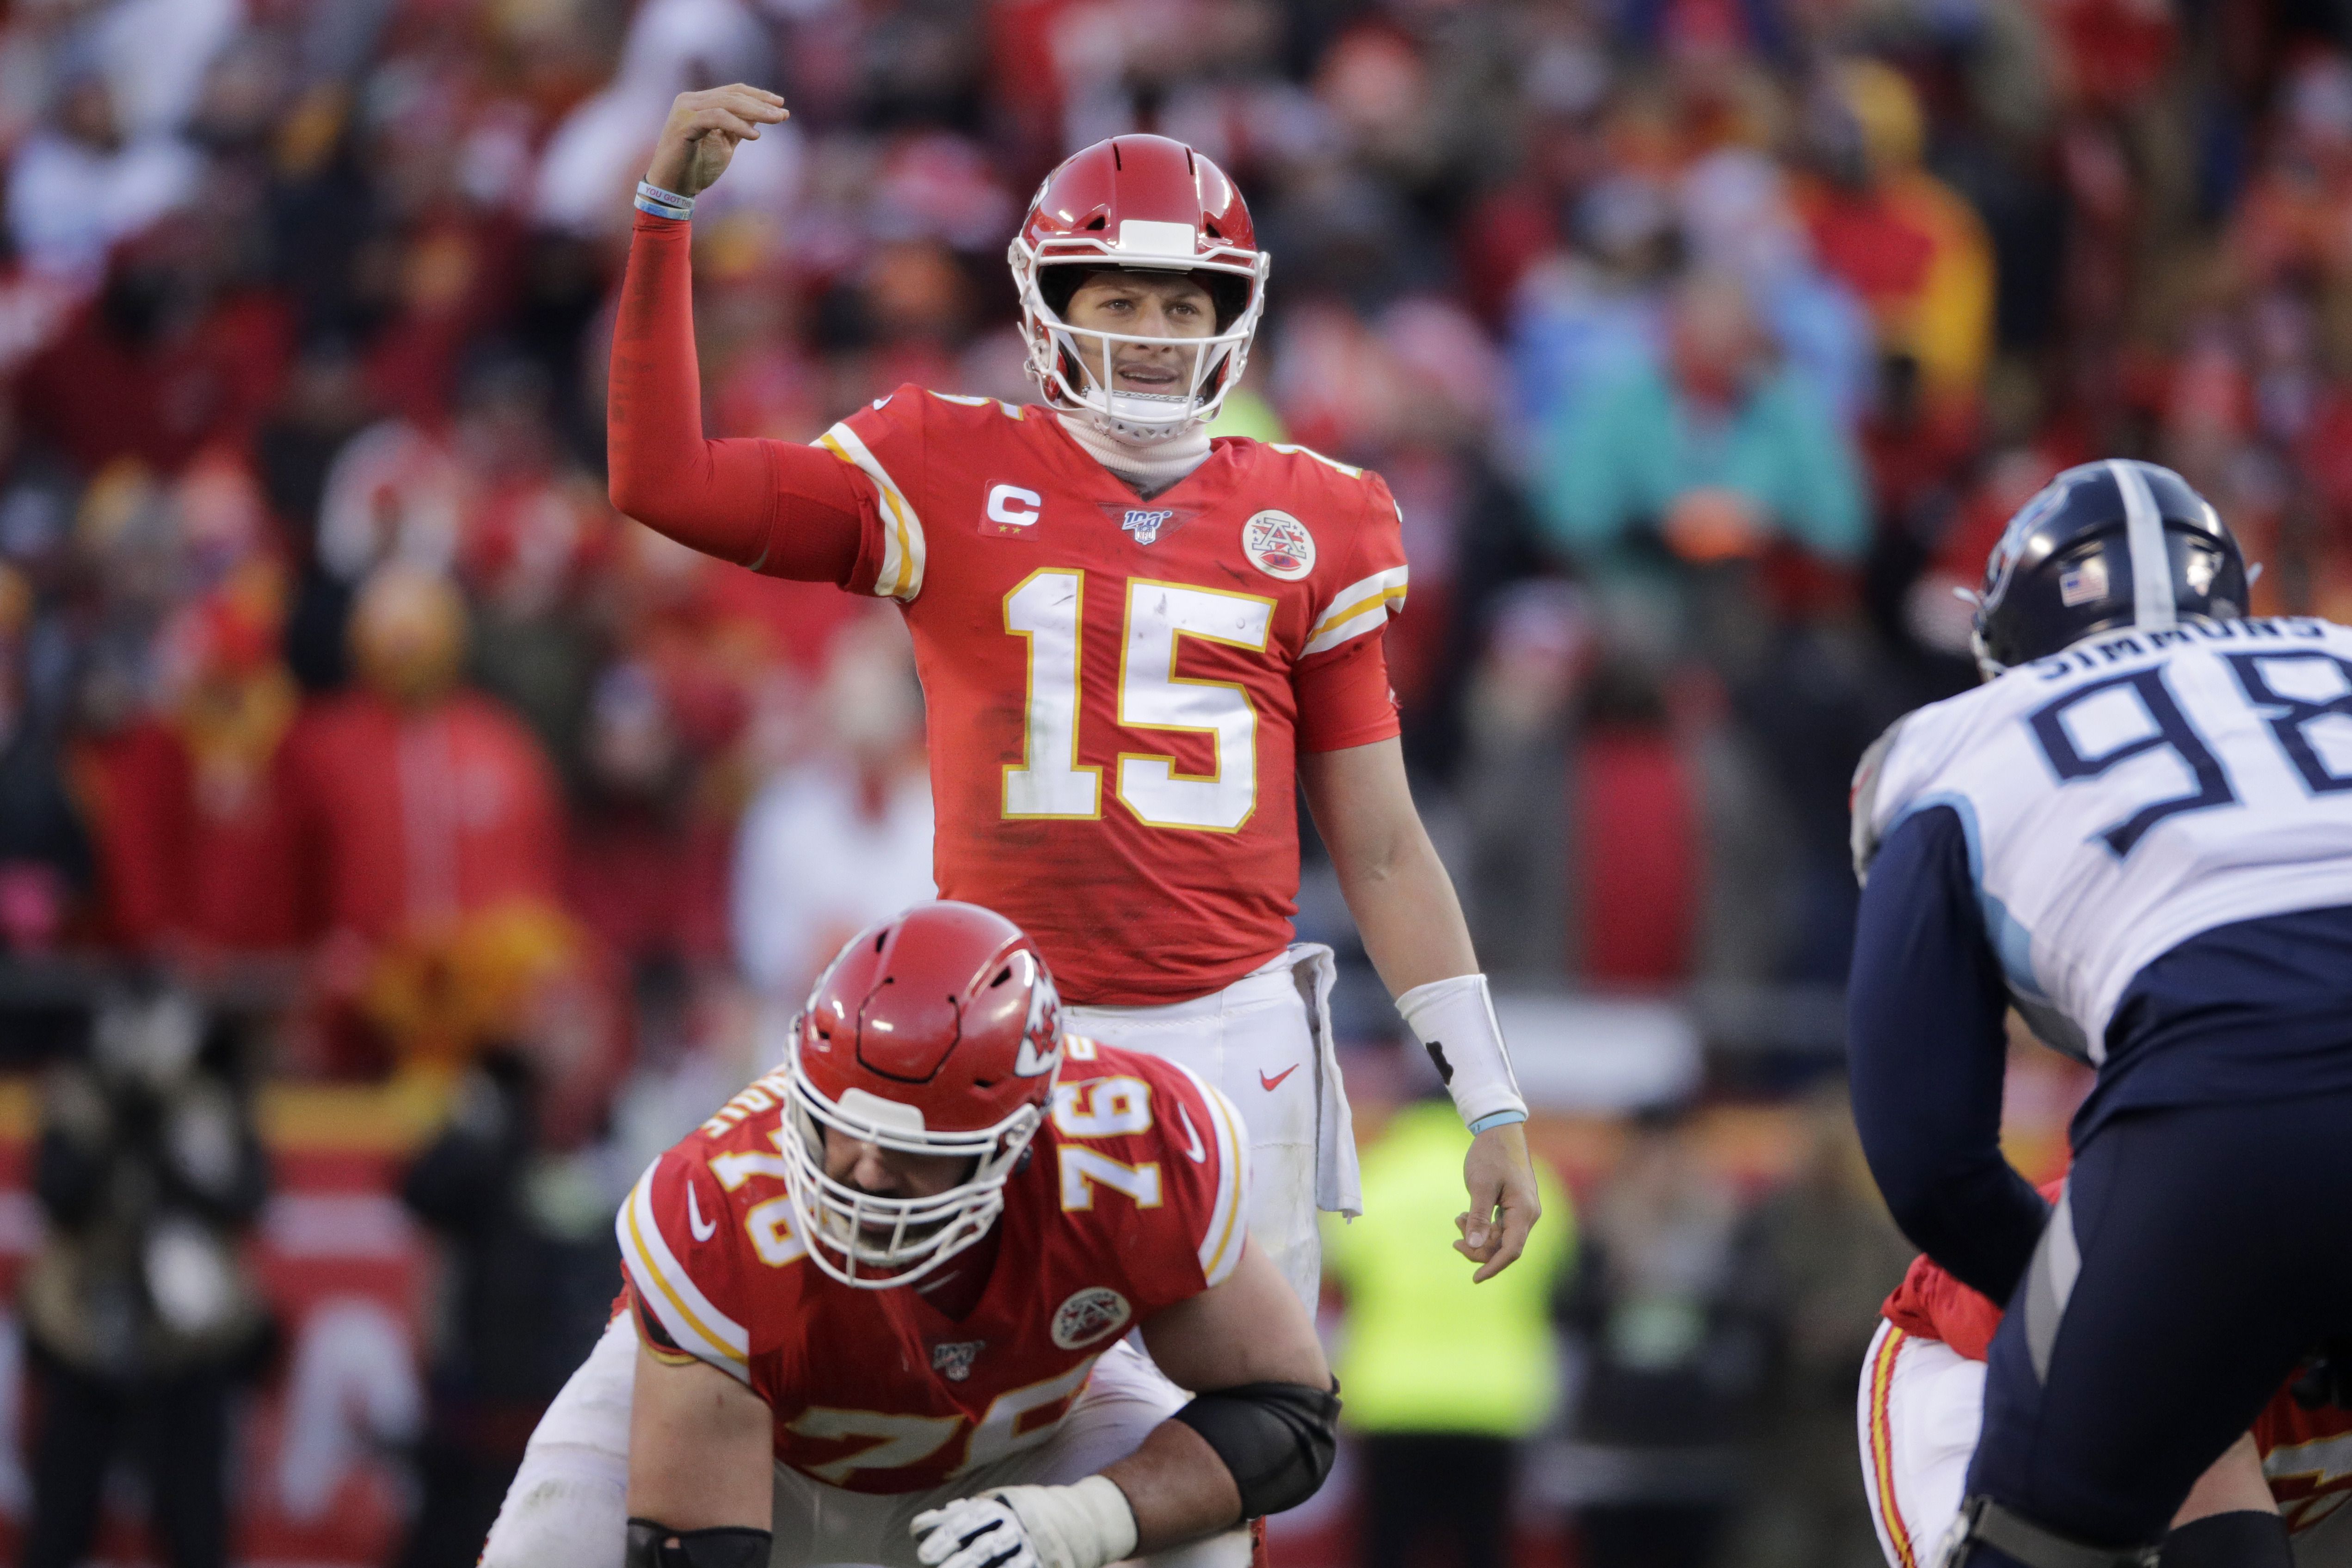 Kansas City advances to Super Bowl 54 after defeating the